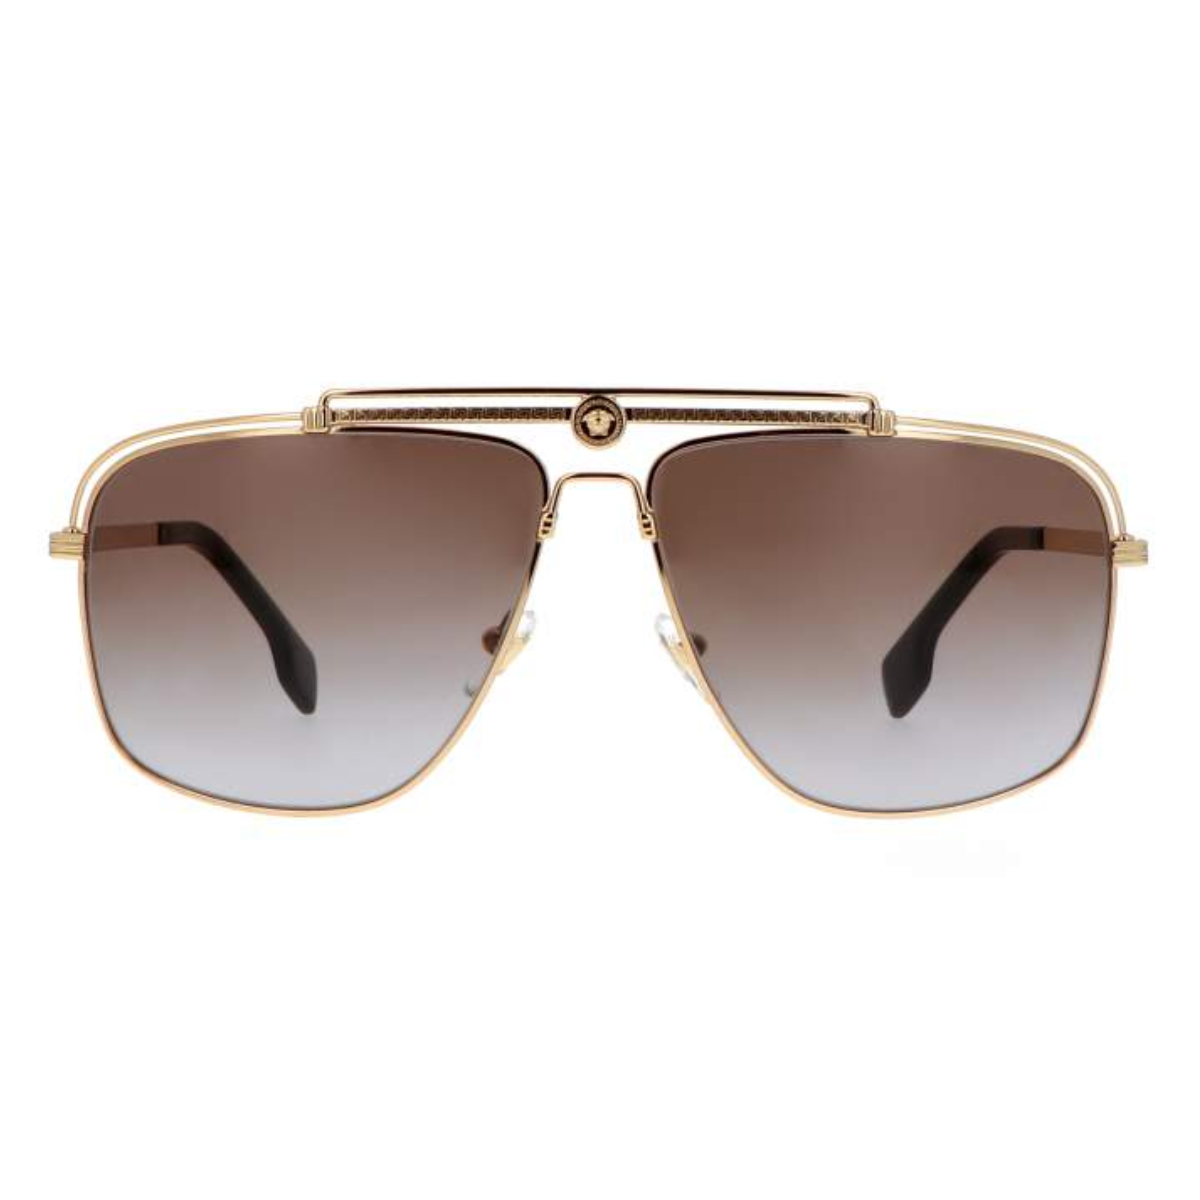 "Discover the chic Versace 2242 100287 Sunglasses at Optorium. Unisex brown gradient lens with black and gold te"mples. Elevate your style today!